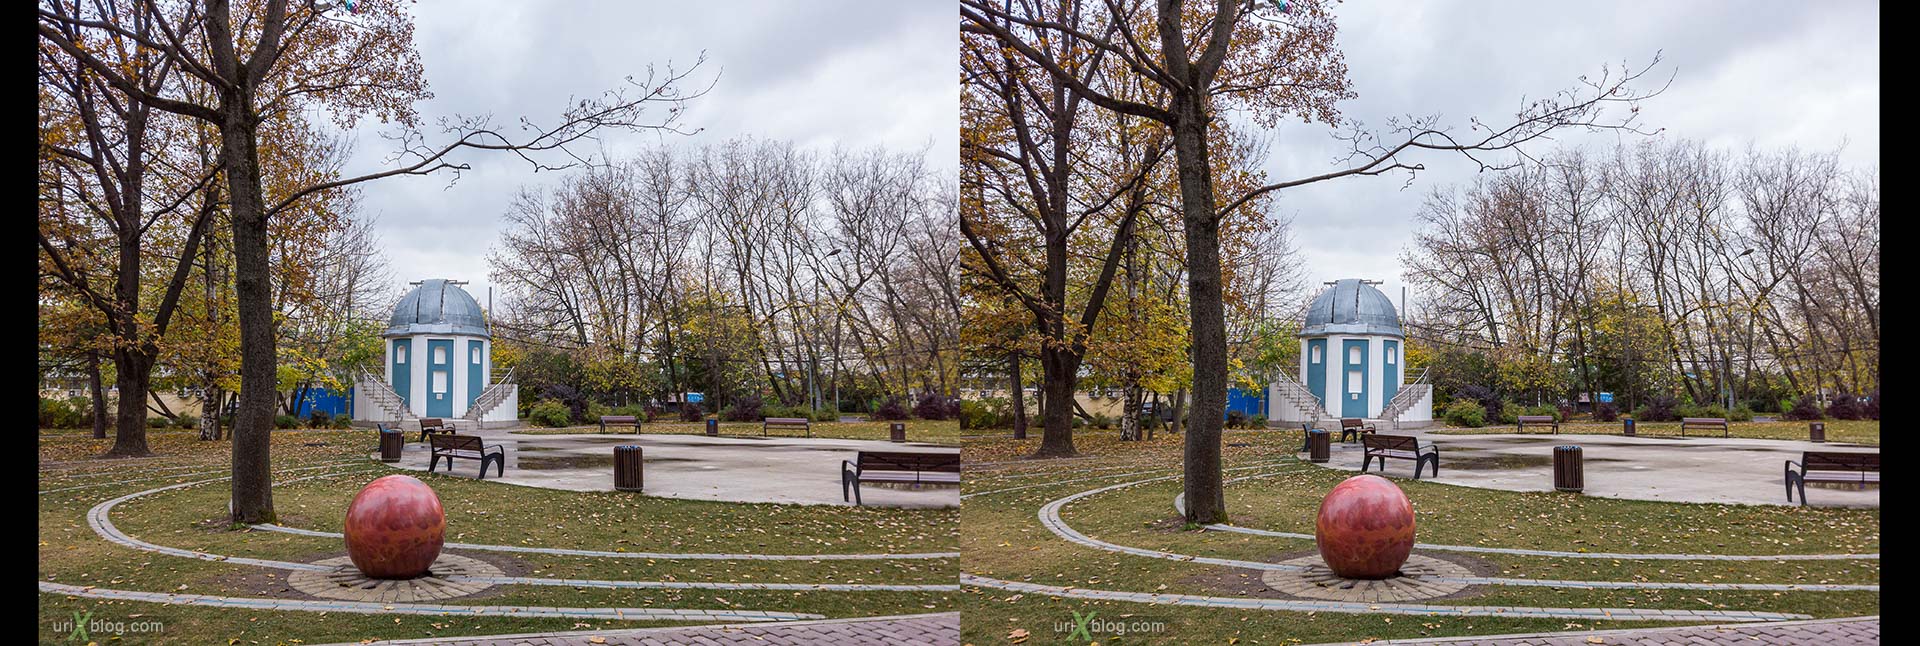 observatory, Sokolniki, park, Moscow, Russia, 3D, stereo pair, cross-eyed, crossview, cross view stereo pair, stereoscopic